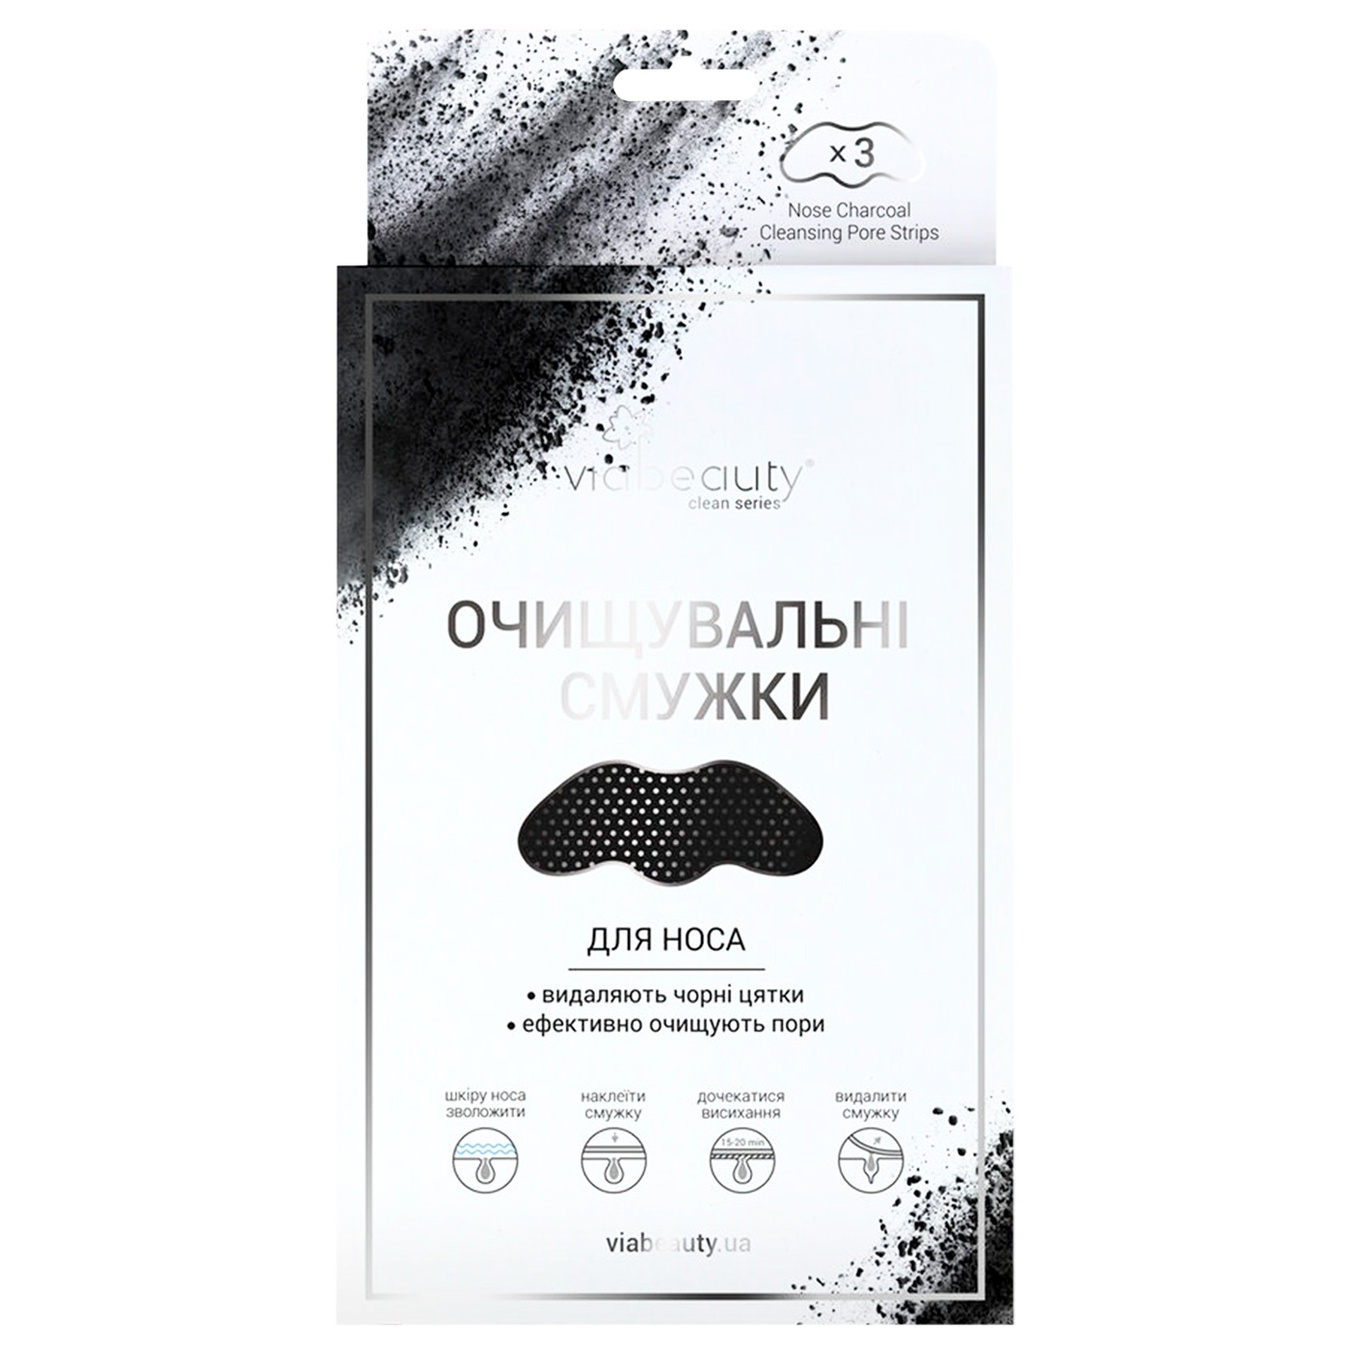 VIABEAUTY Nose Cleansing Charcoal Strips 3 pcs